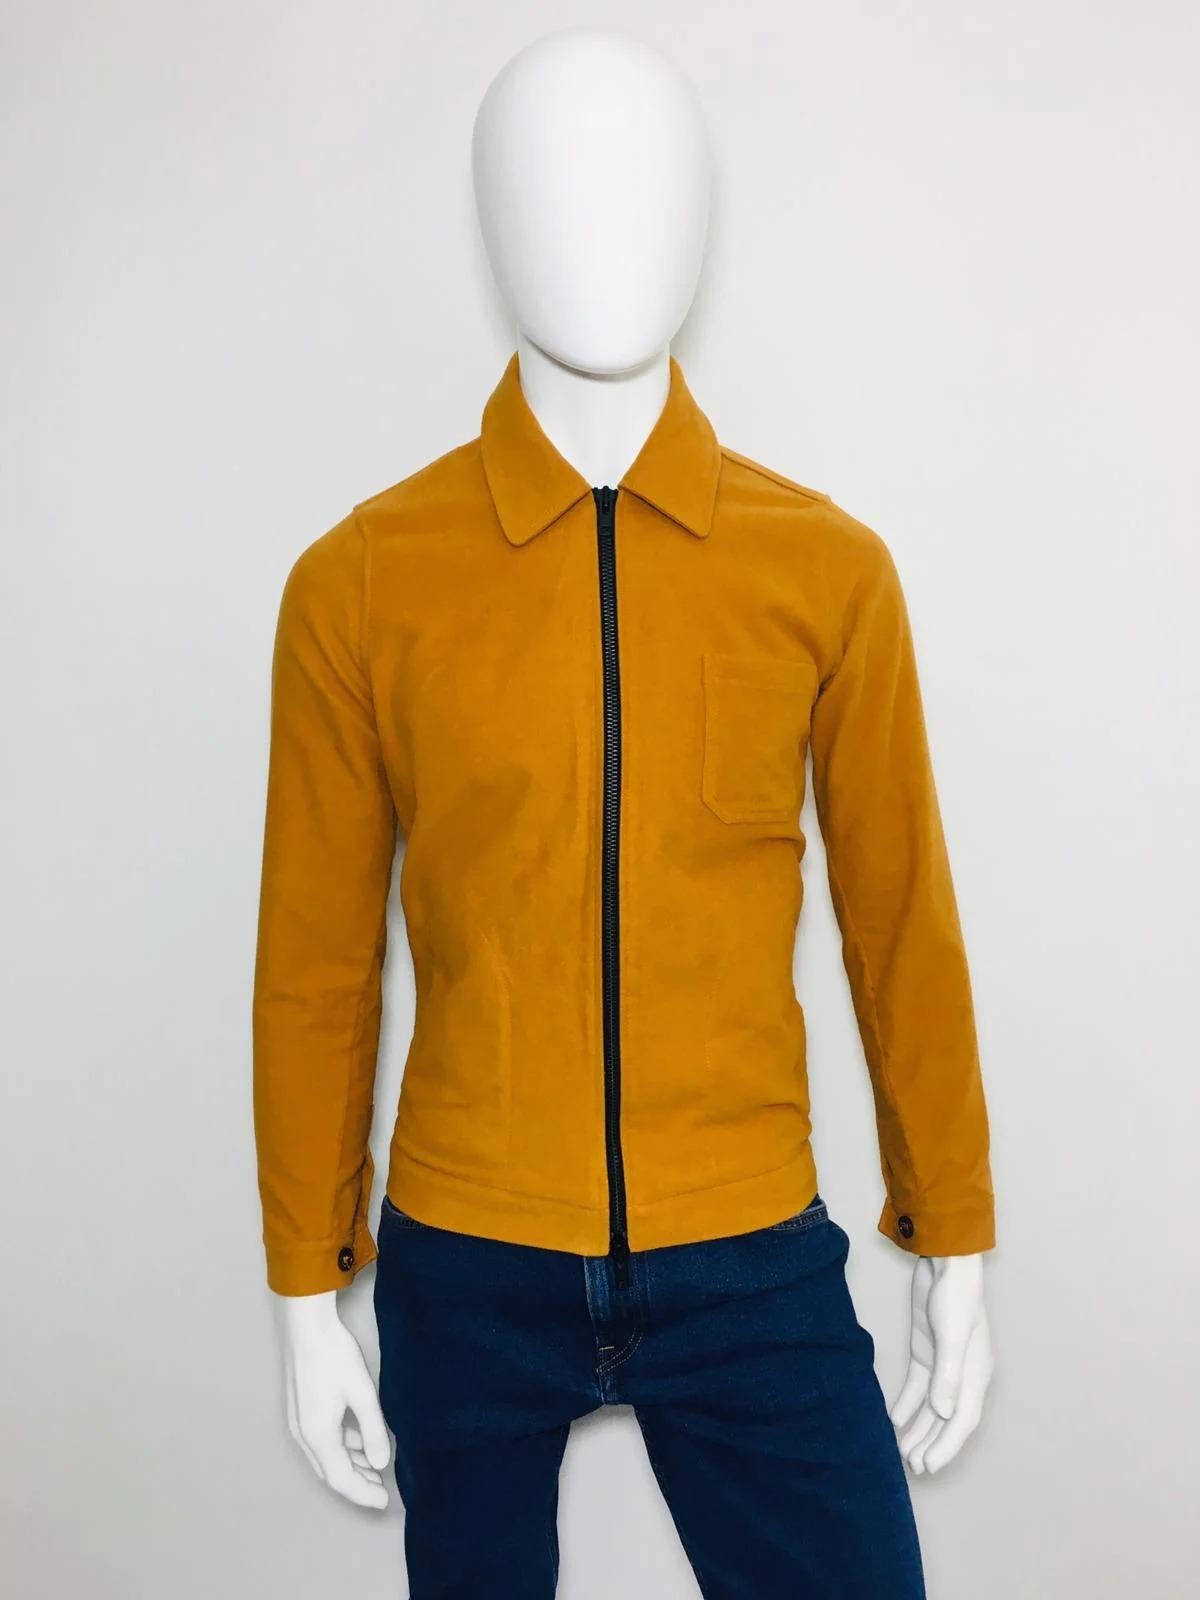 Percival Moleskin Jacket

Retro Look Mustard made with moleskin cotton. Double ended YKK zipper. 

Additional information:
Size – S
Composition - Cotton
Condition – Very Good